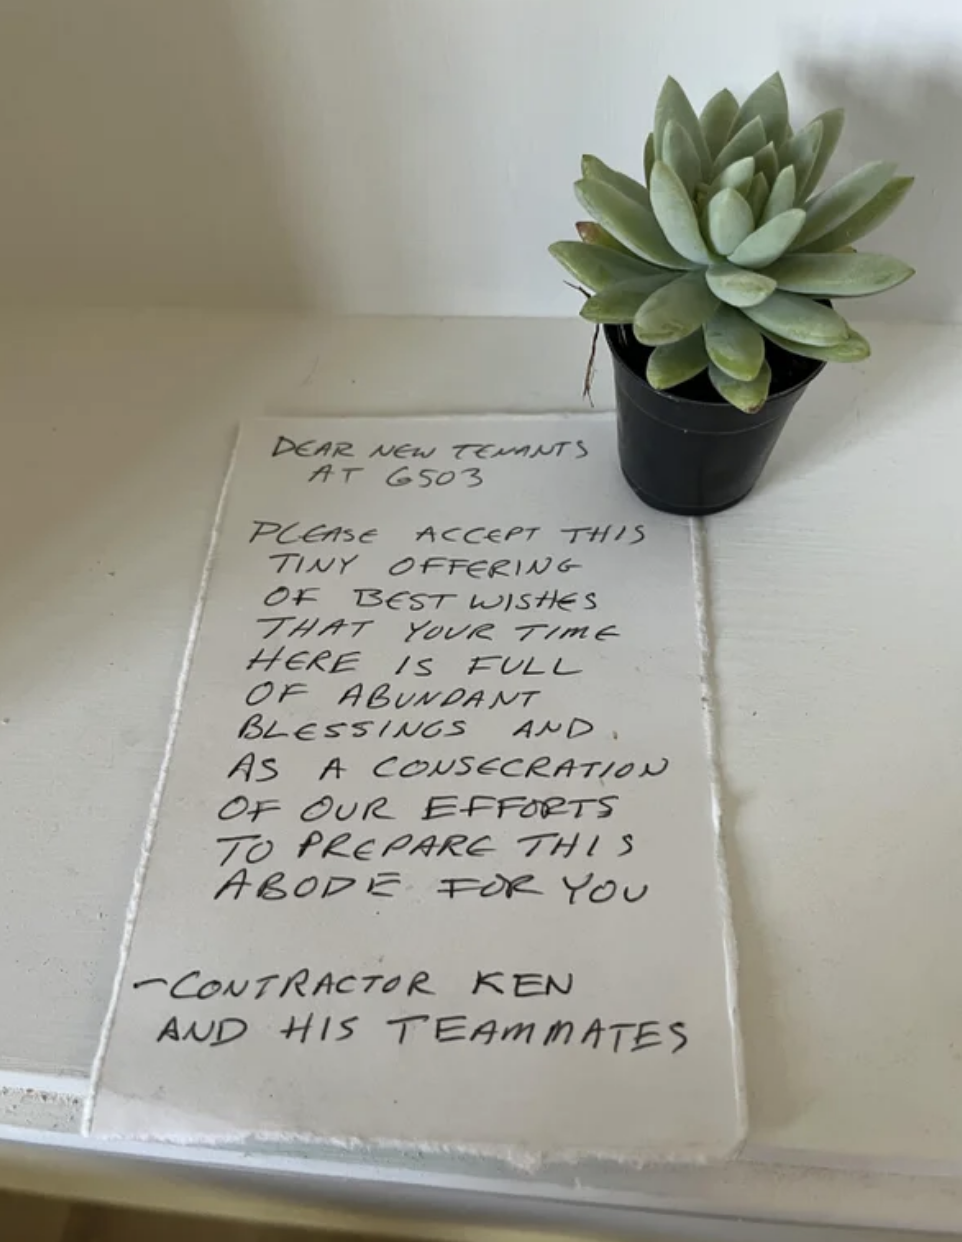 the note left with a little plant